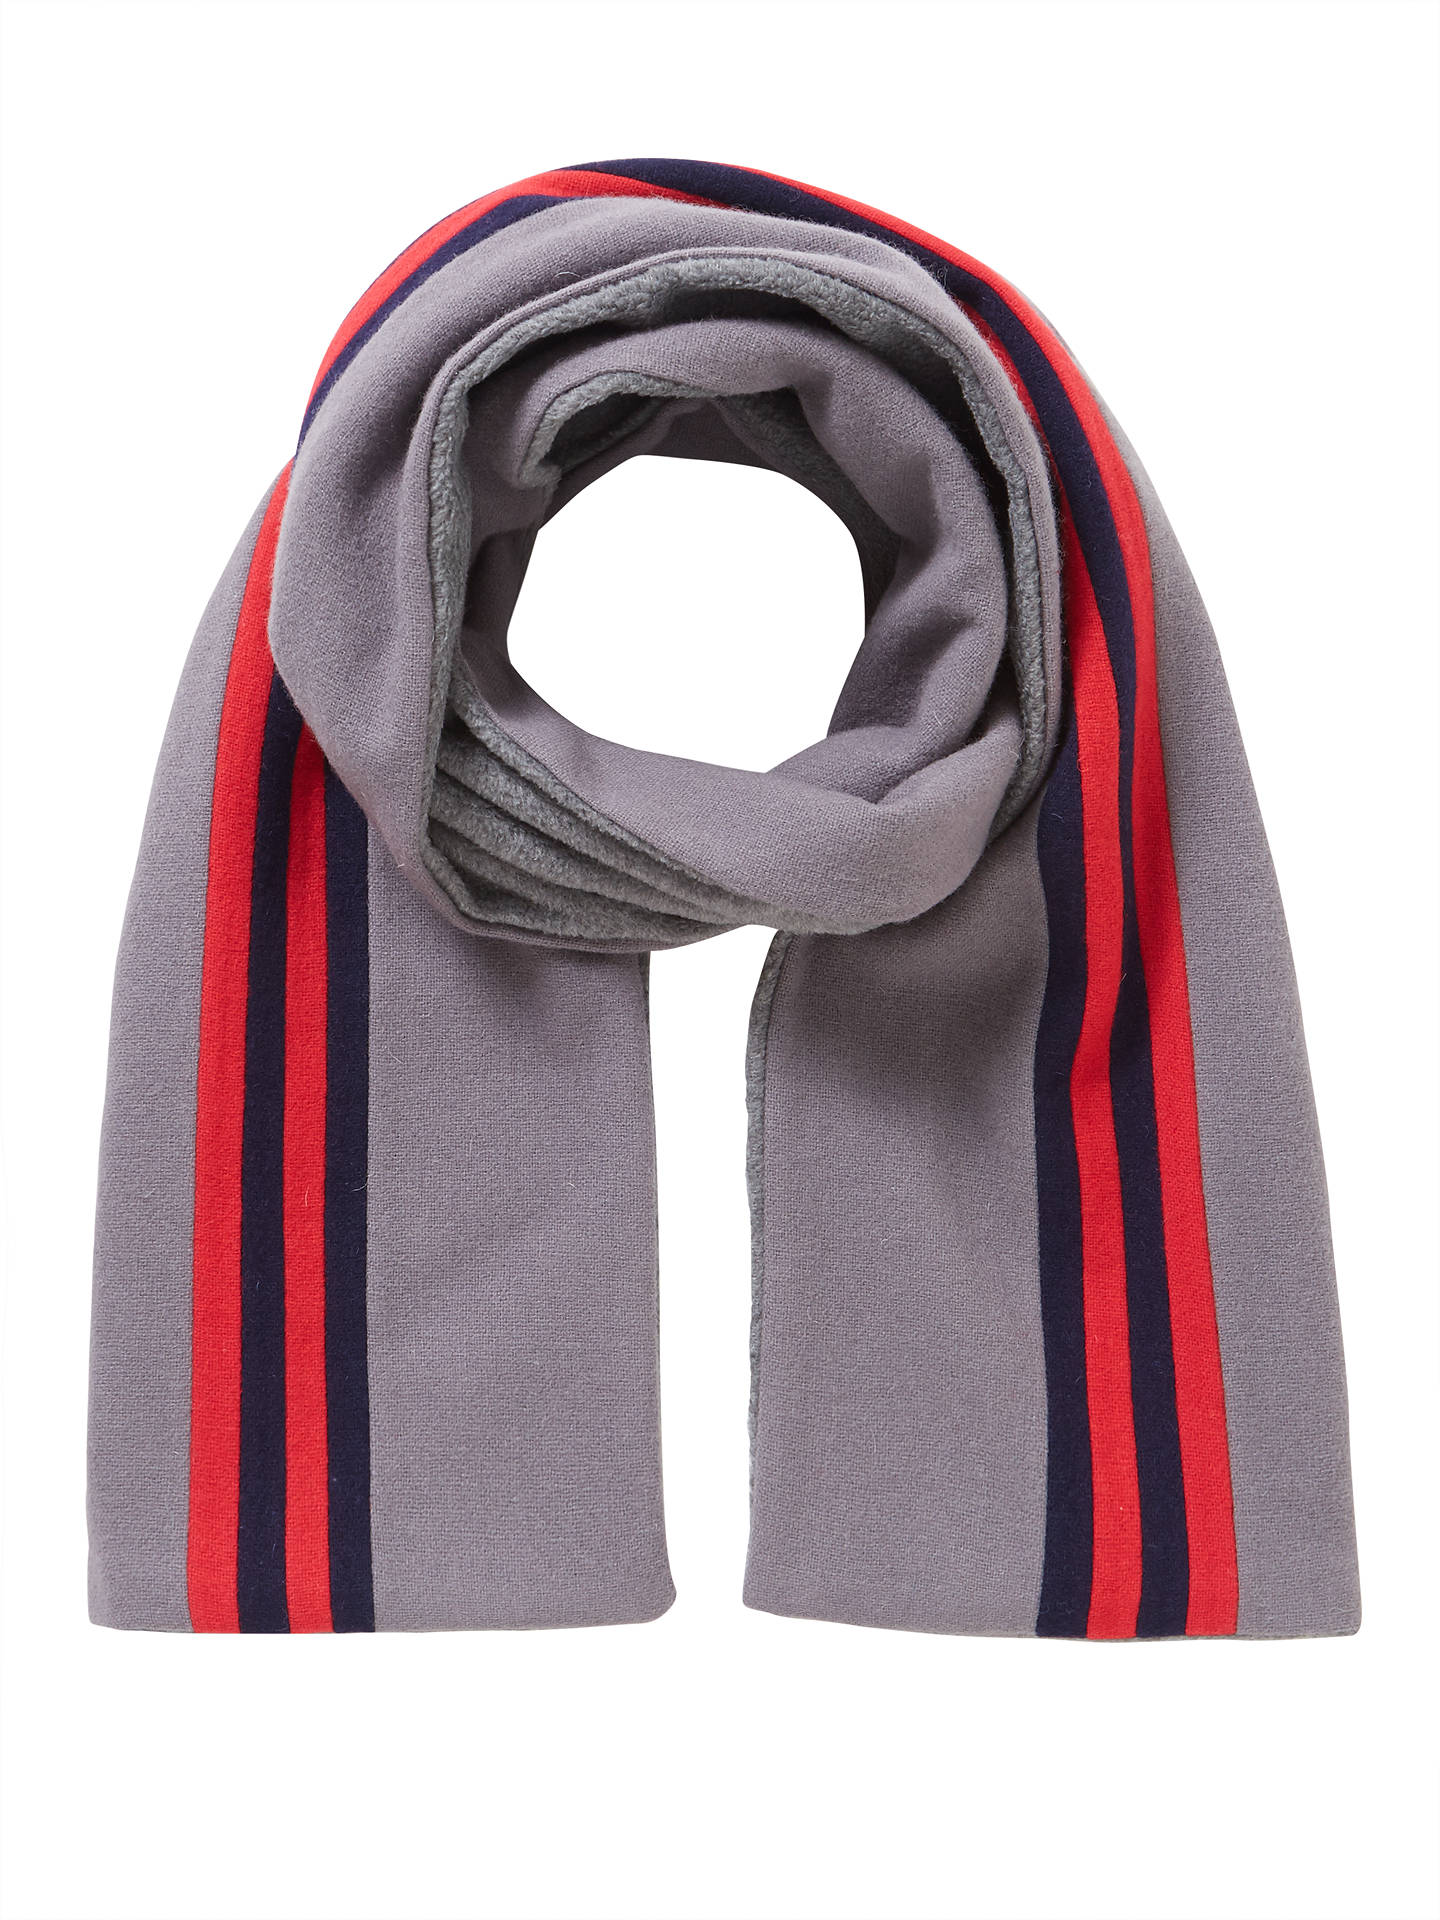 Highclare School Scarf, Grey/Red at John Lewis & Partners